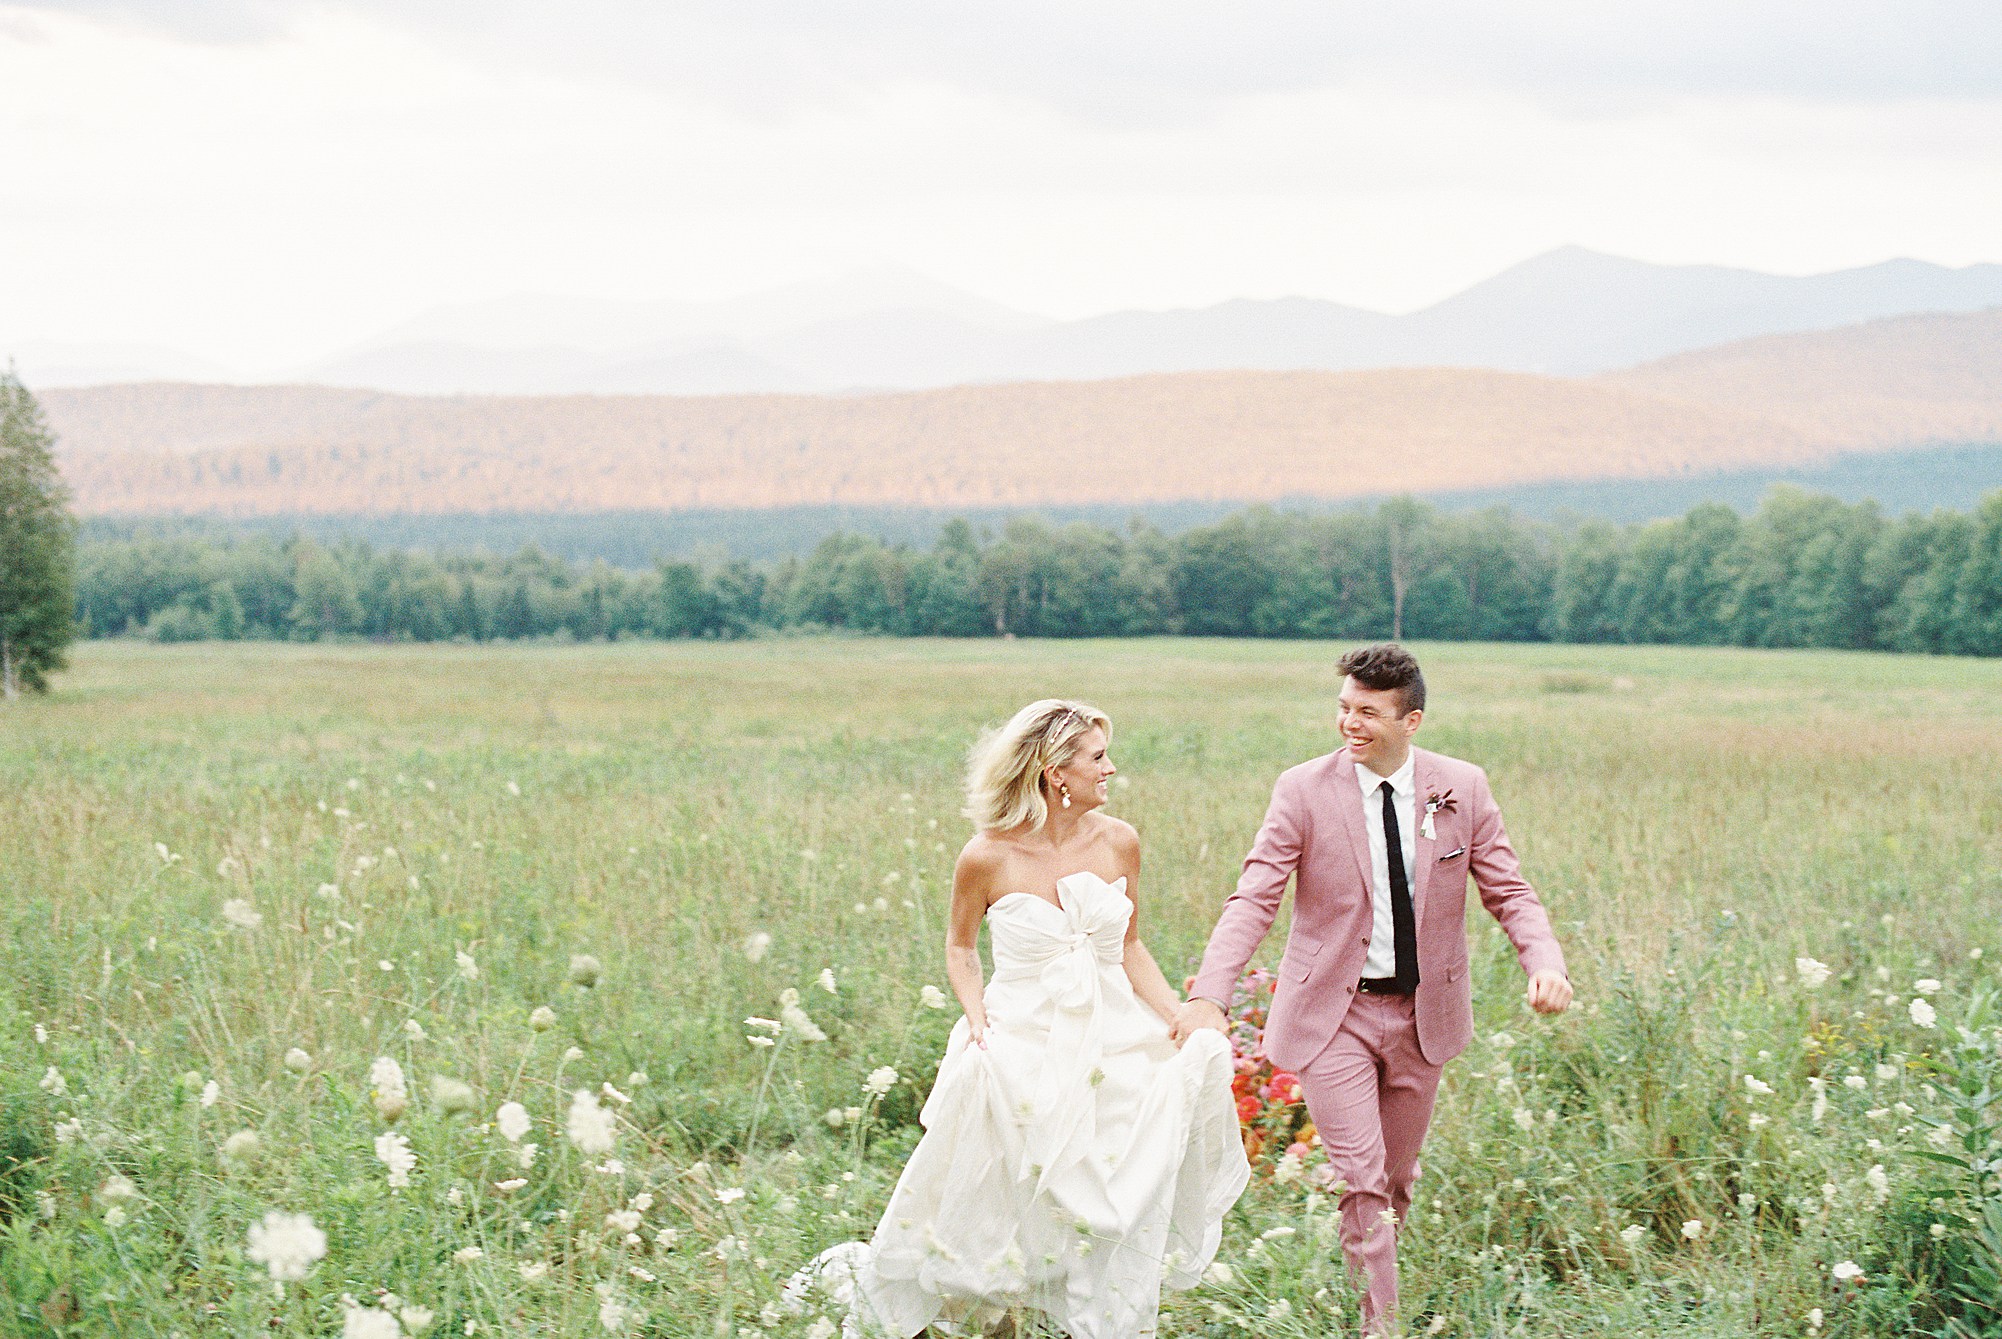 couples portraits on film for wedding in the high peaks region of ADK